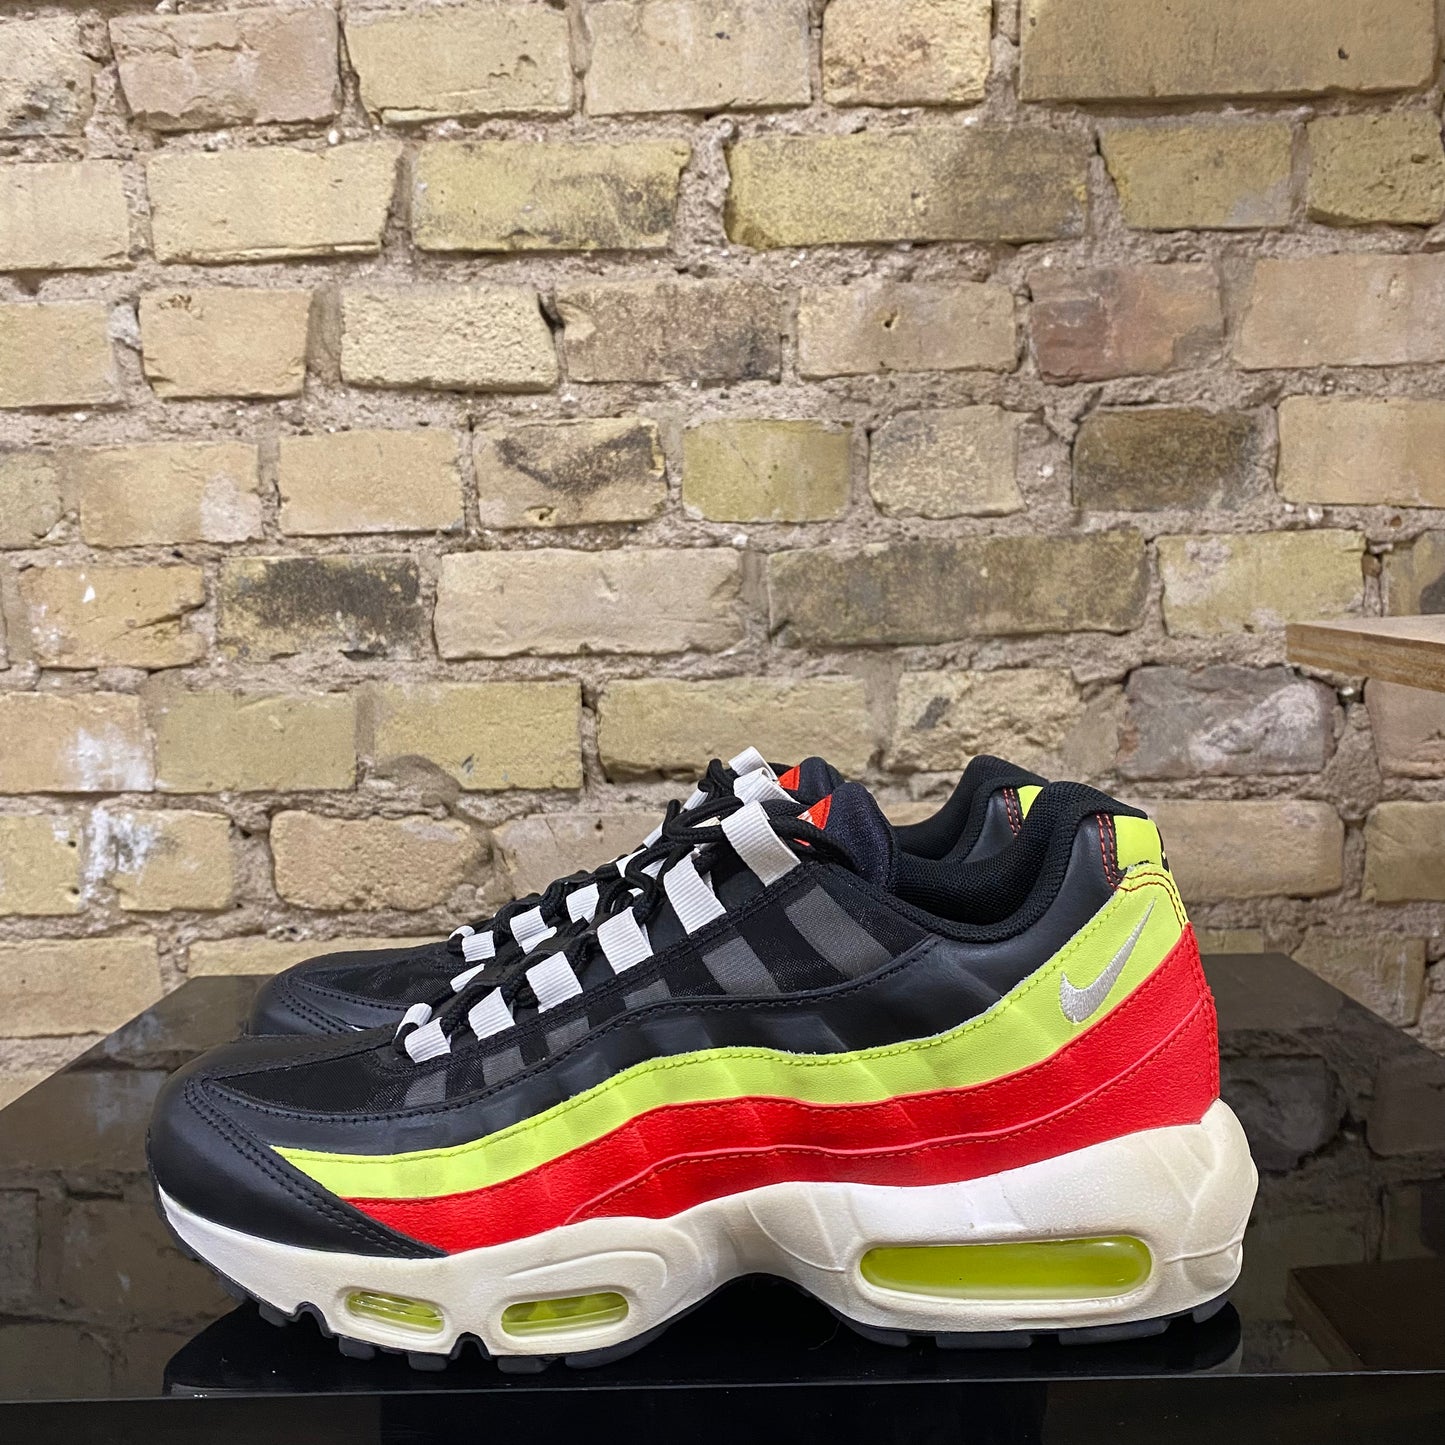 Air Max Black/Neon/Red Size 10 (MKE) TRUSTED CLUB